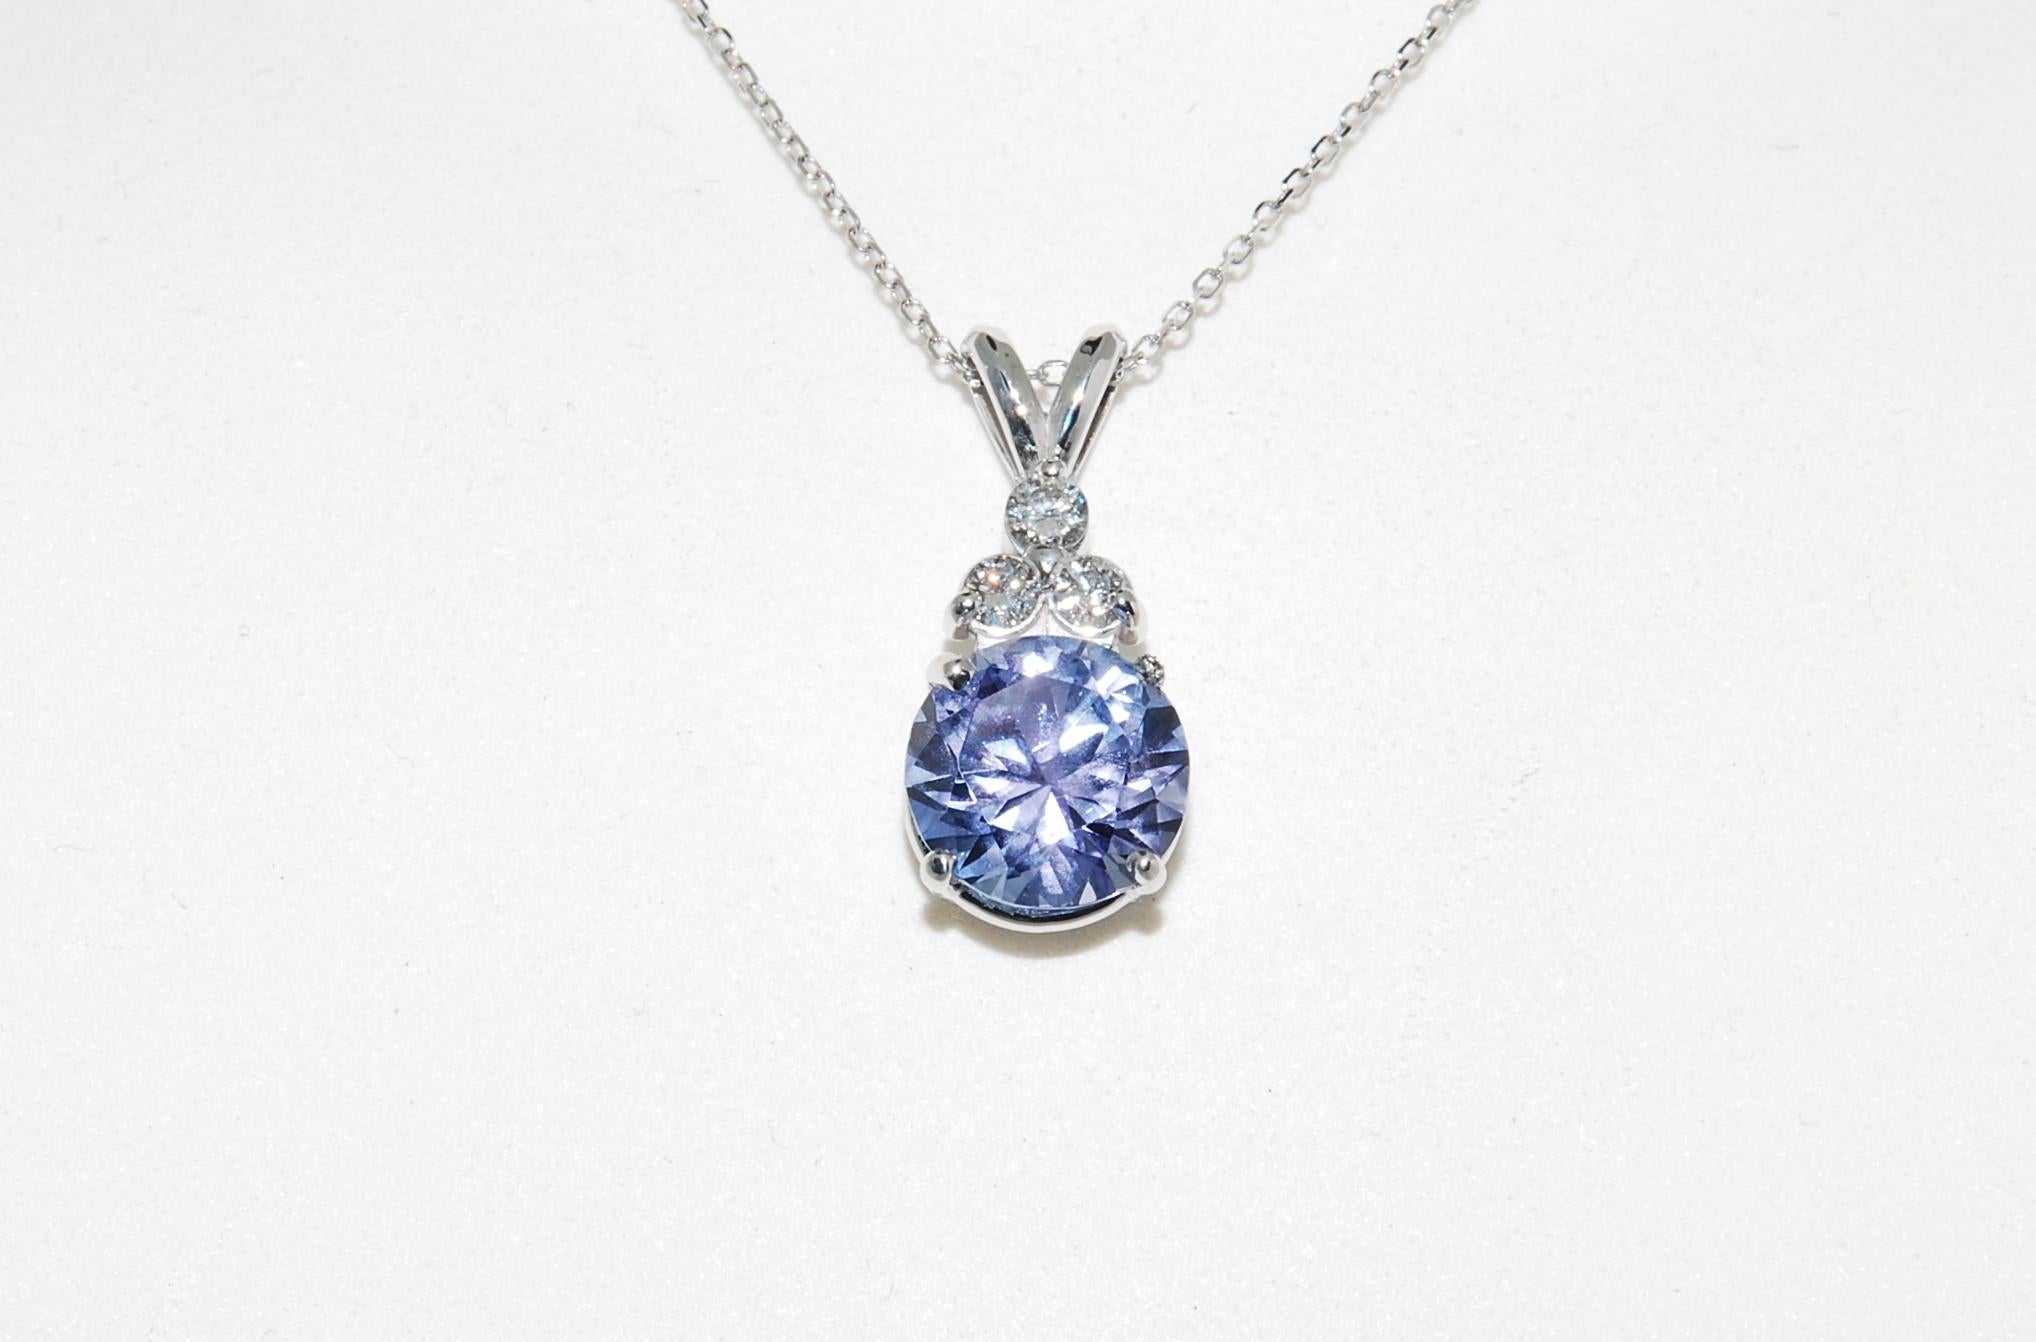 2.75 carat Tanzanite that was cut by AGTA award winning gem cutter Larry Woods. It is a light purple that some people just love. A brilliant stone accented by 3 small (0.3 carats each) diamonds. 